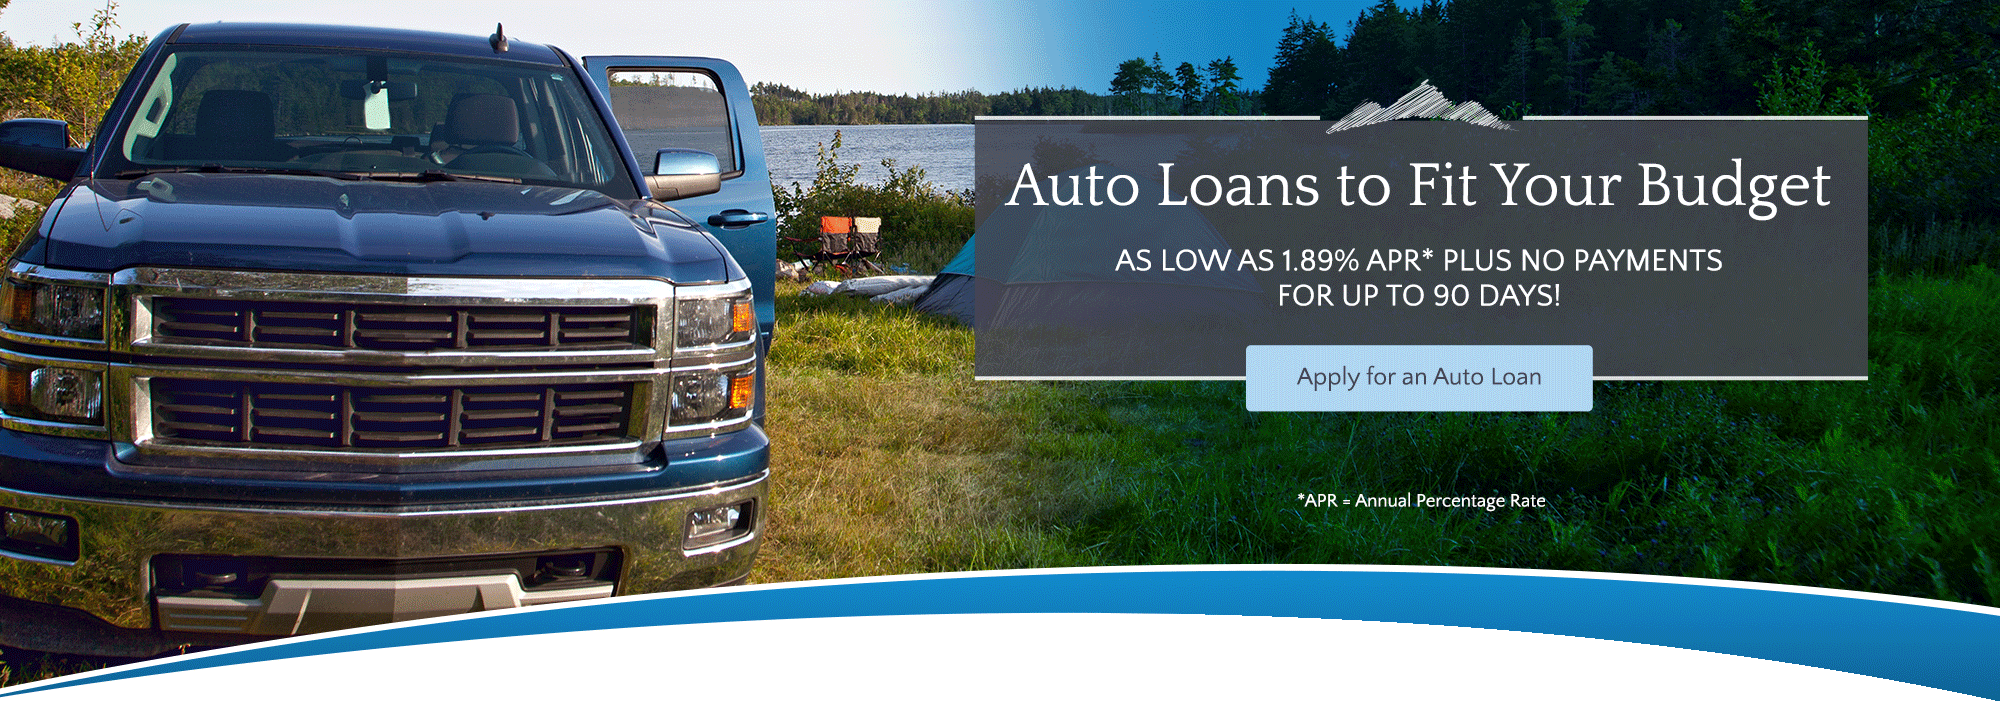 Auto Loans to Fit Your Budget- As low as 1.89% APR* Plus no payments for up to 90 days! Click to apply.